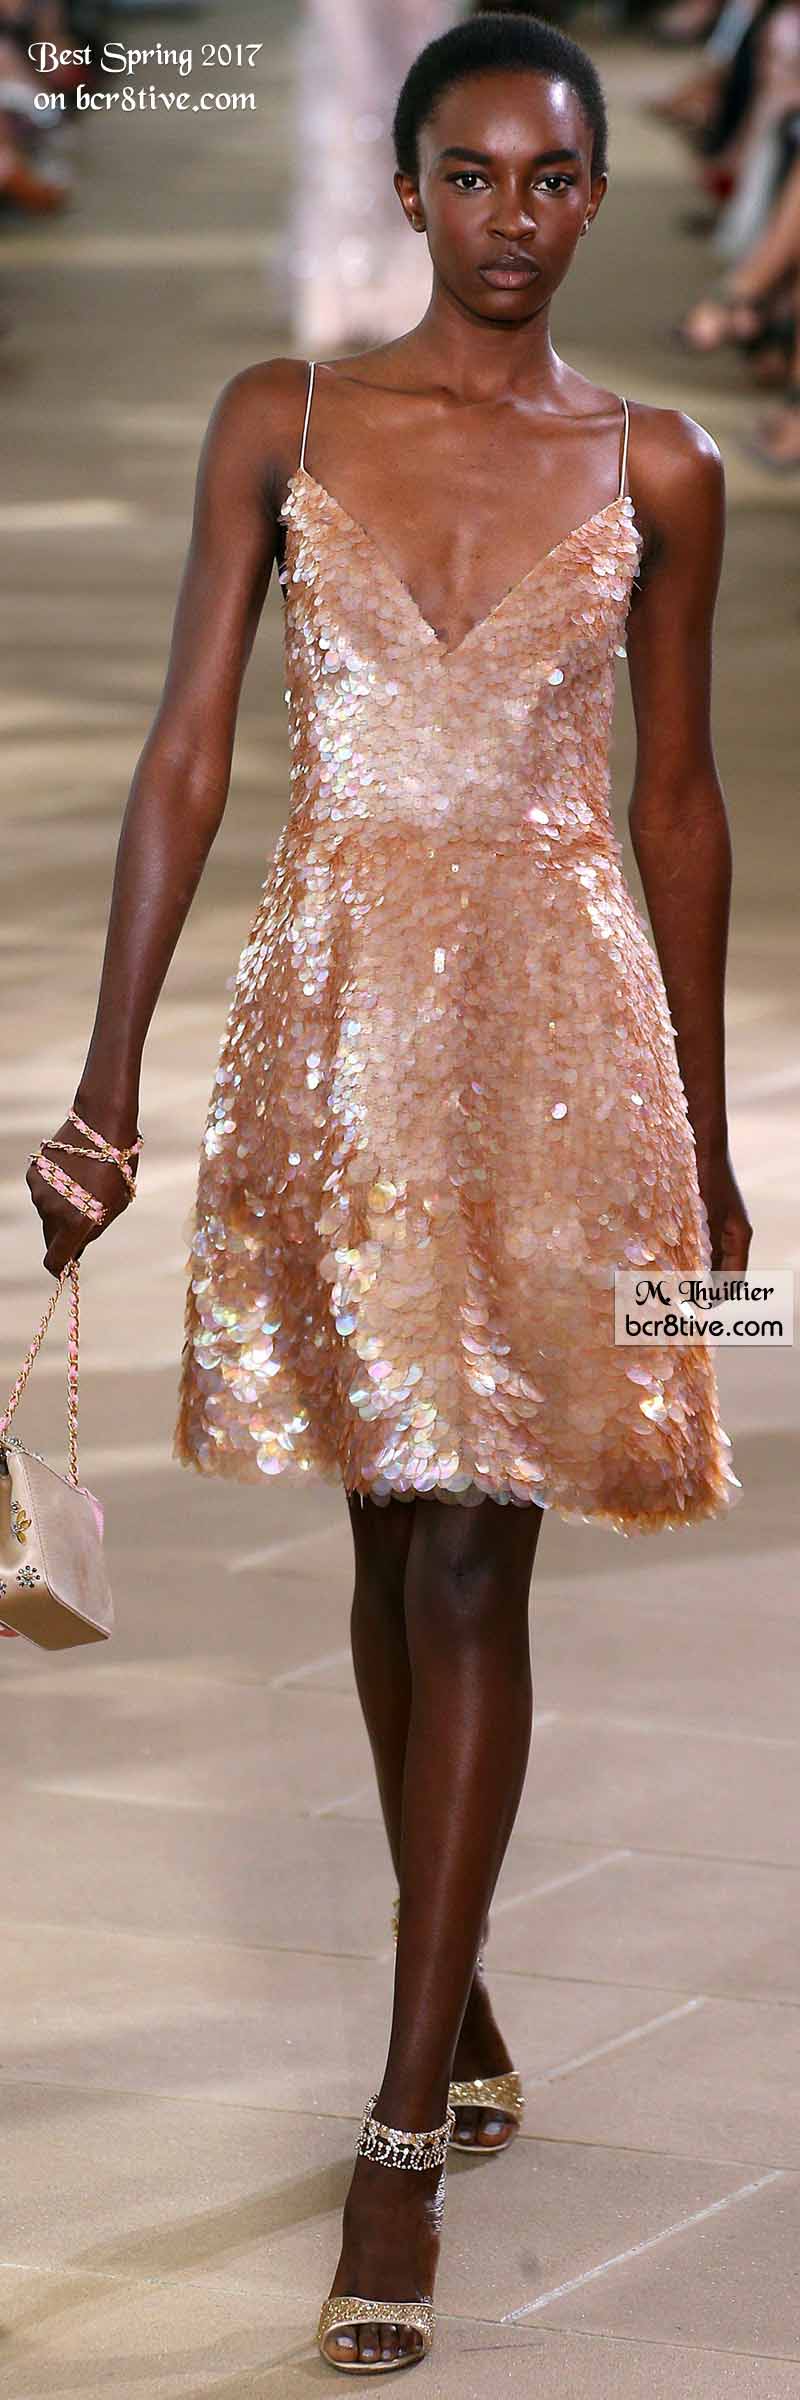 Monique Lhuillier - The Best Looks from New York Fashion Week Spring 2017